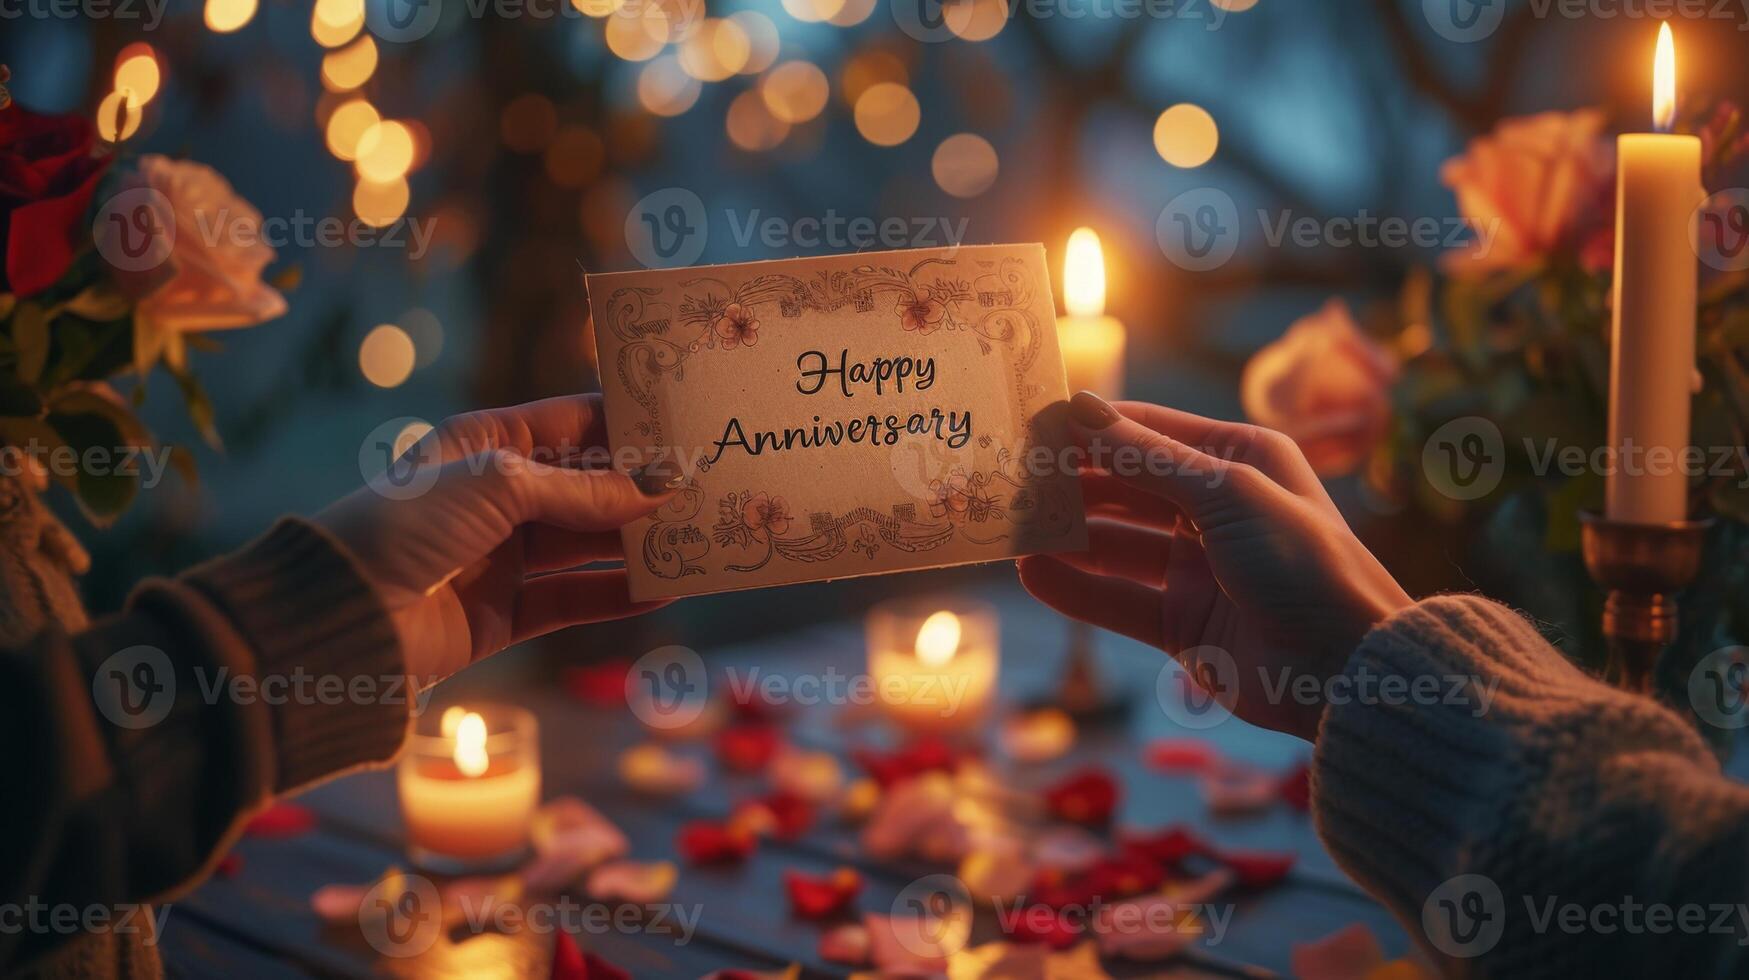 AI generated Hands exchanging a delicate, handmade anniversary card, the words Happy Anniversary visible in elegant script. Surrounding the card are scattered rose petals and a soft photo